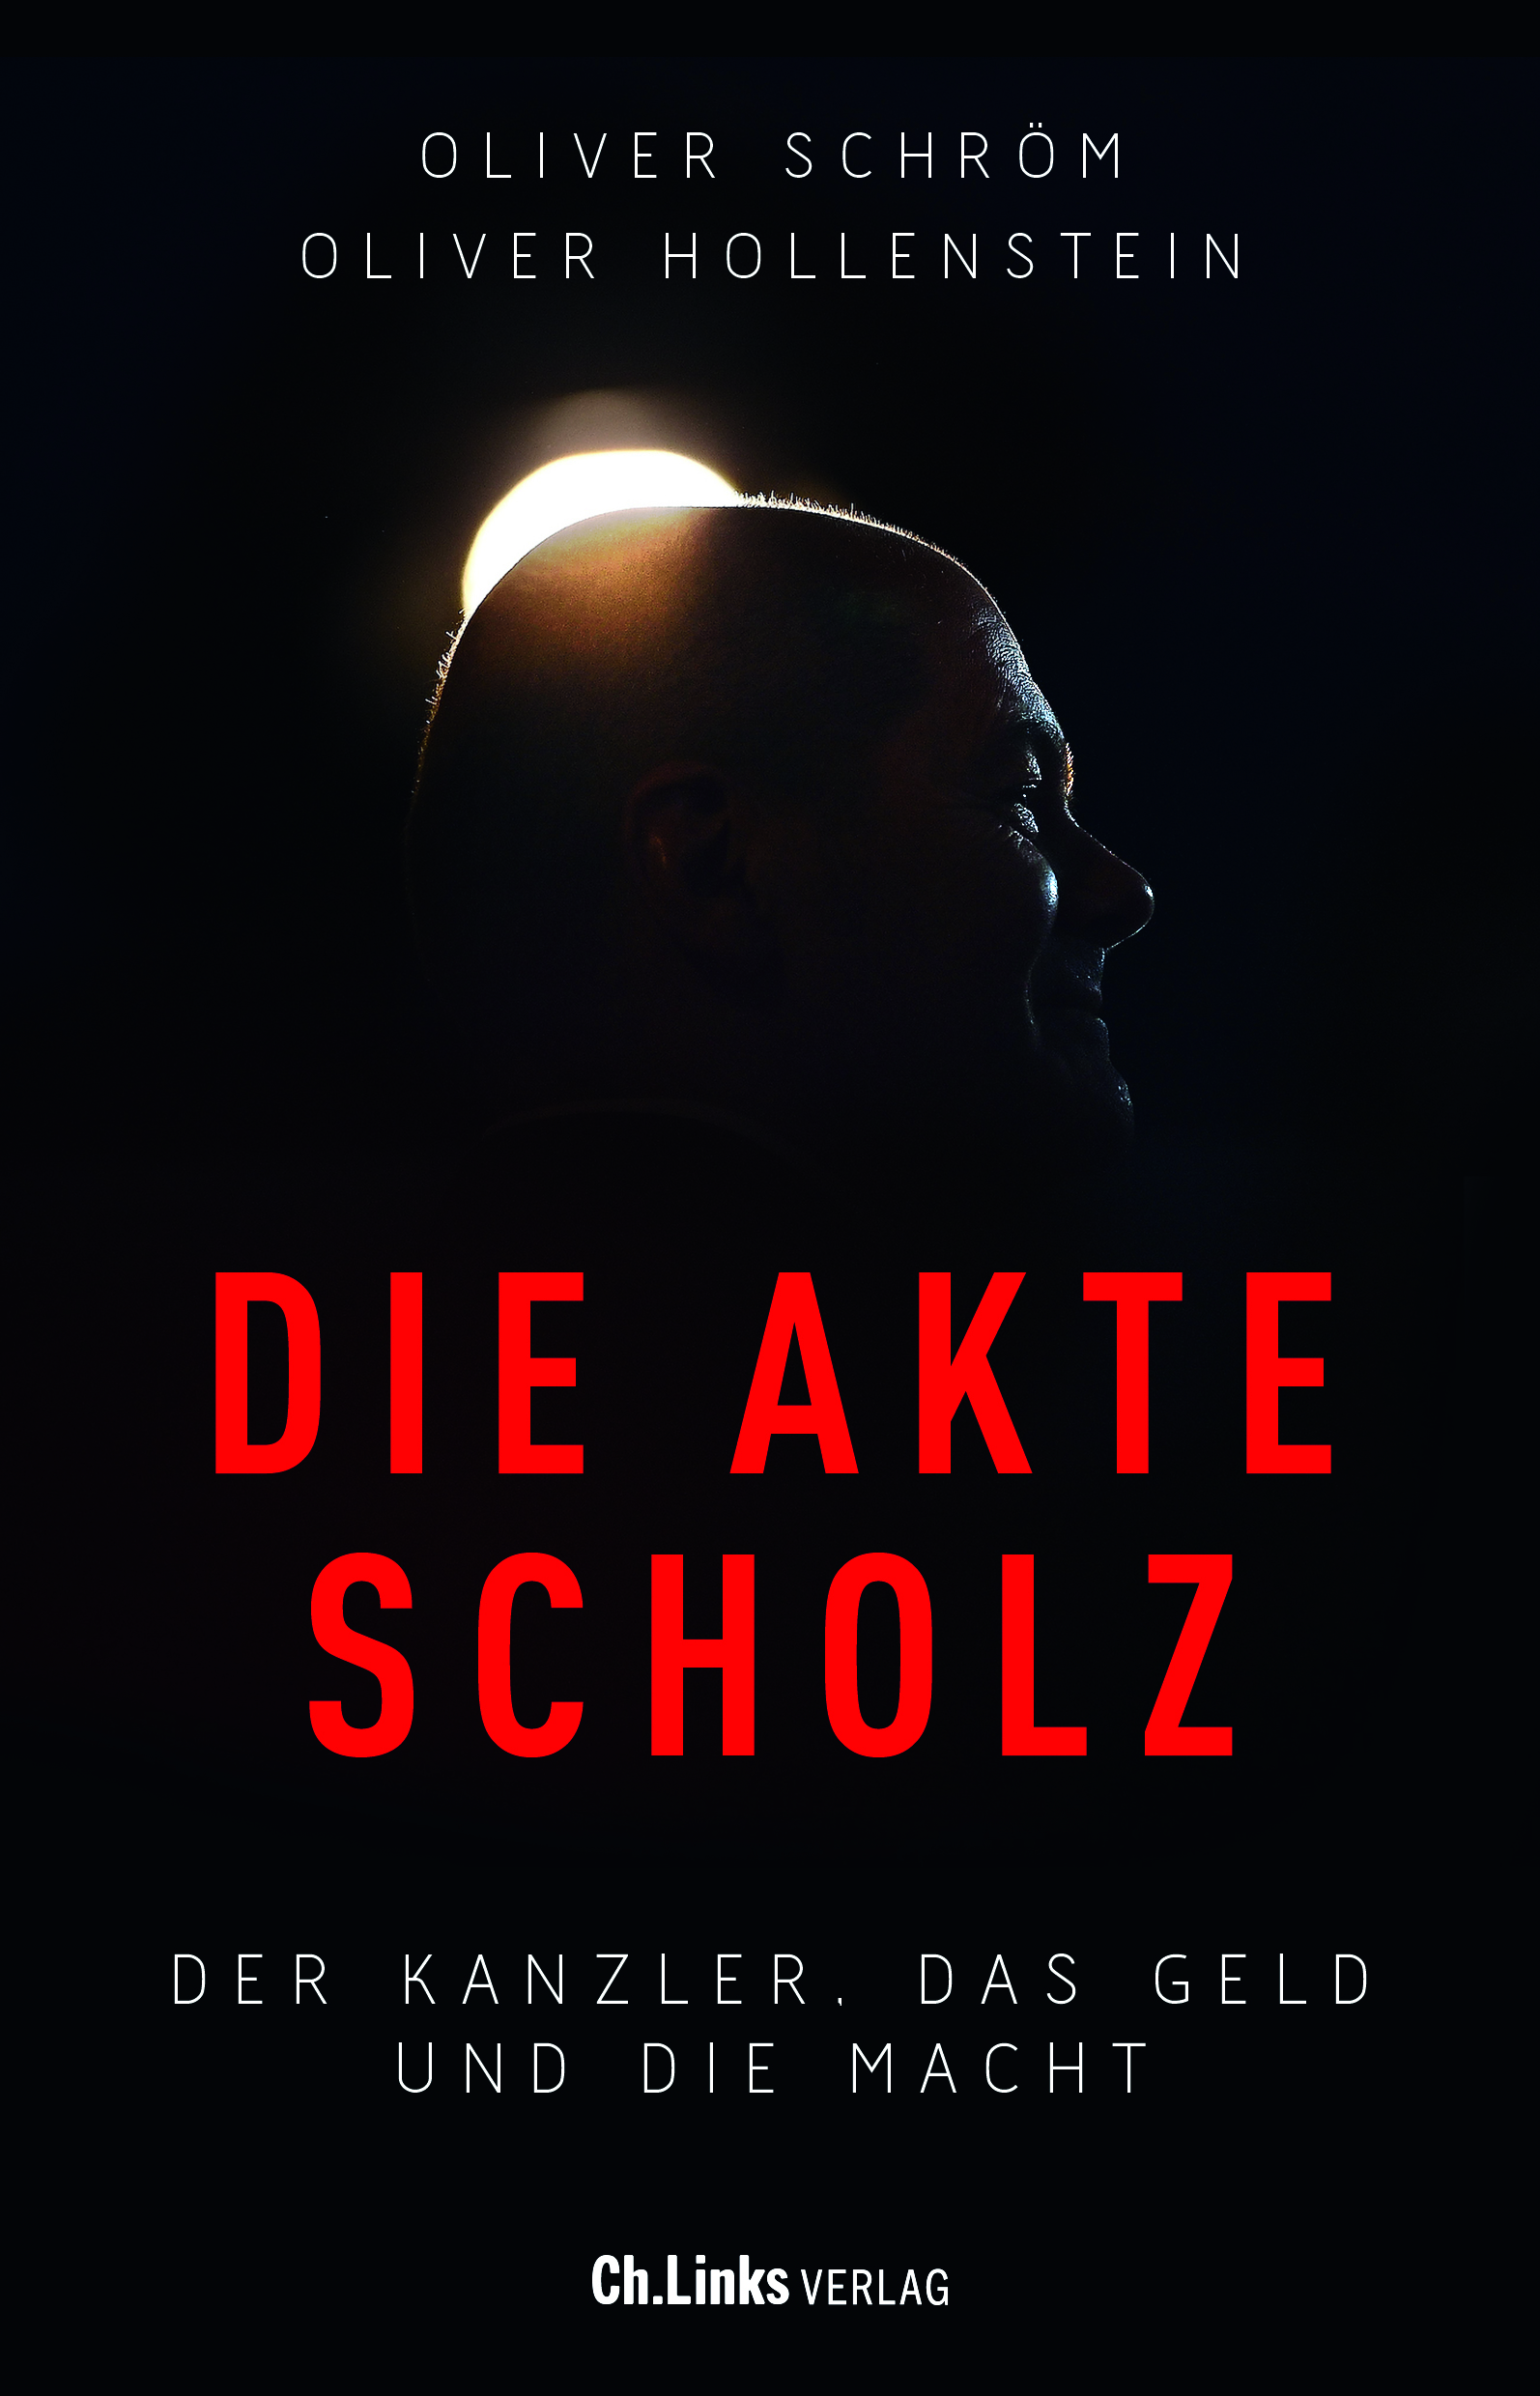 Akte Scholz Cover